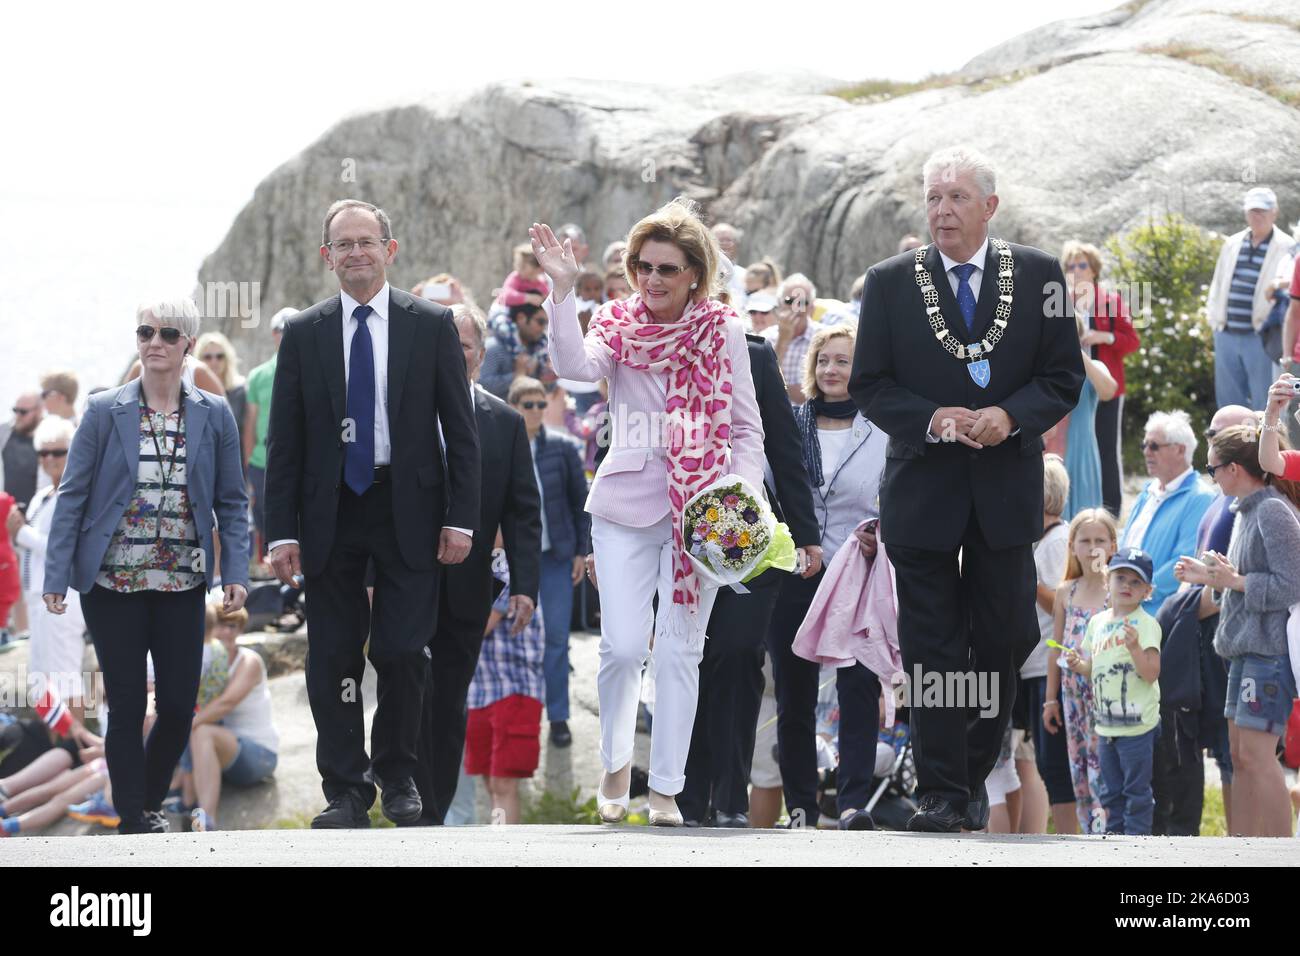 Faerder, Norway 20150627. HM Queen Sonja arrives Faerder National Park at Verdens Ende on Tjoemoe. County Governor Erling Lae (right) and Mayor in Jan Martiniussen. Foto: Terje Bendiksby / NTB scanpix  Stock Photo